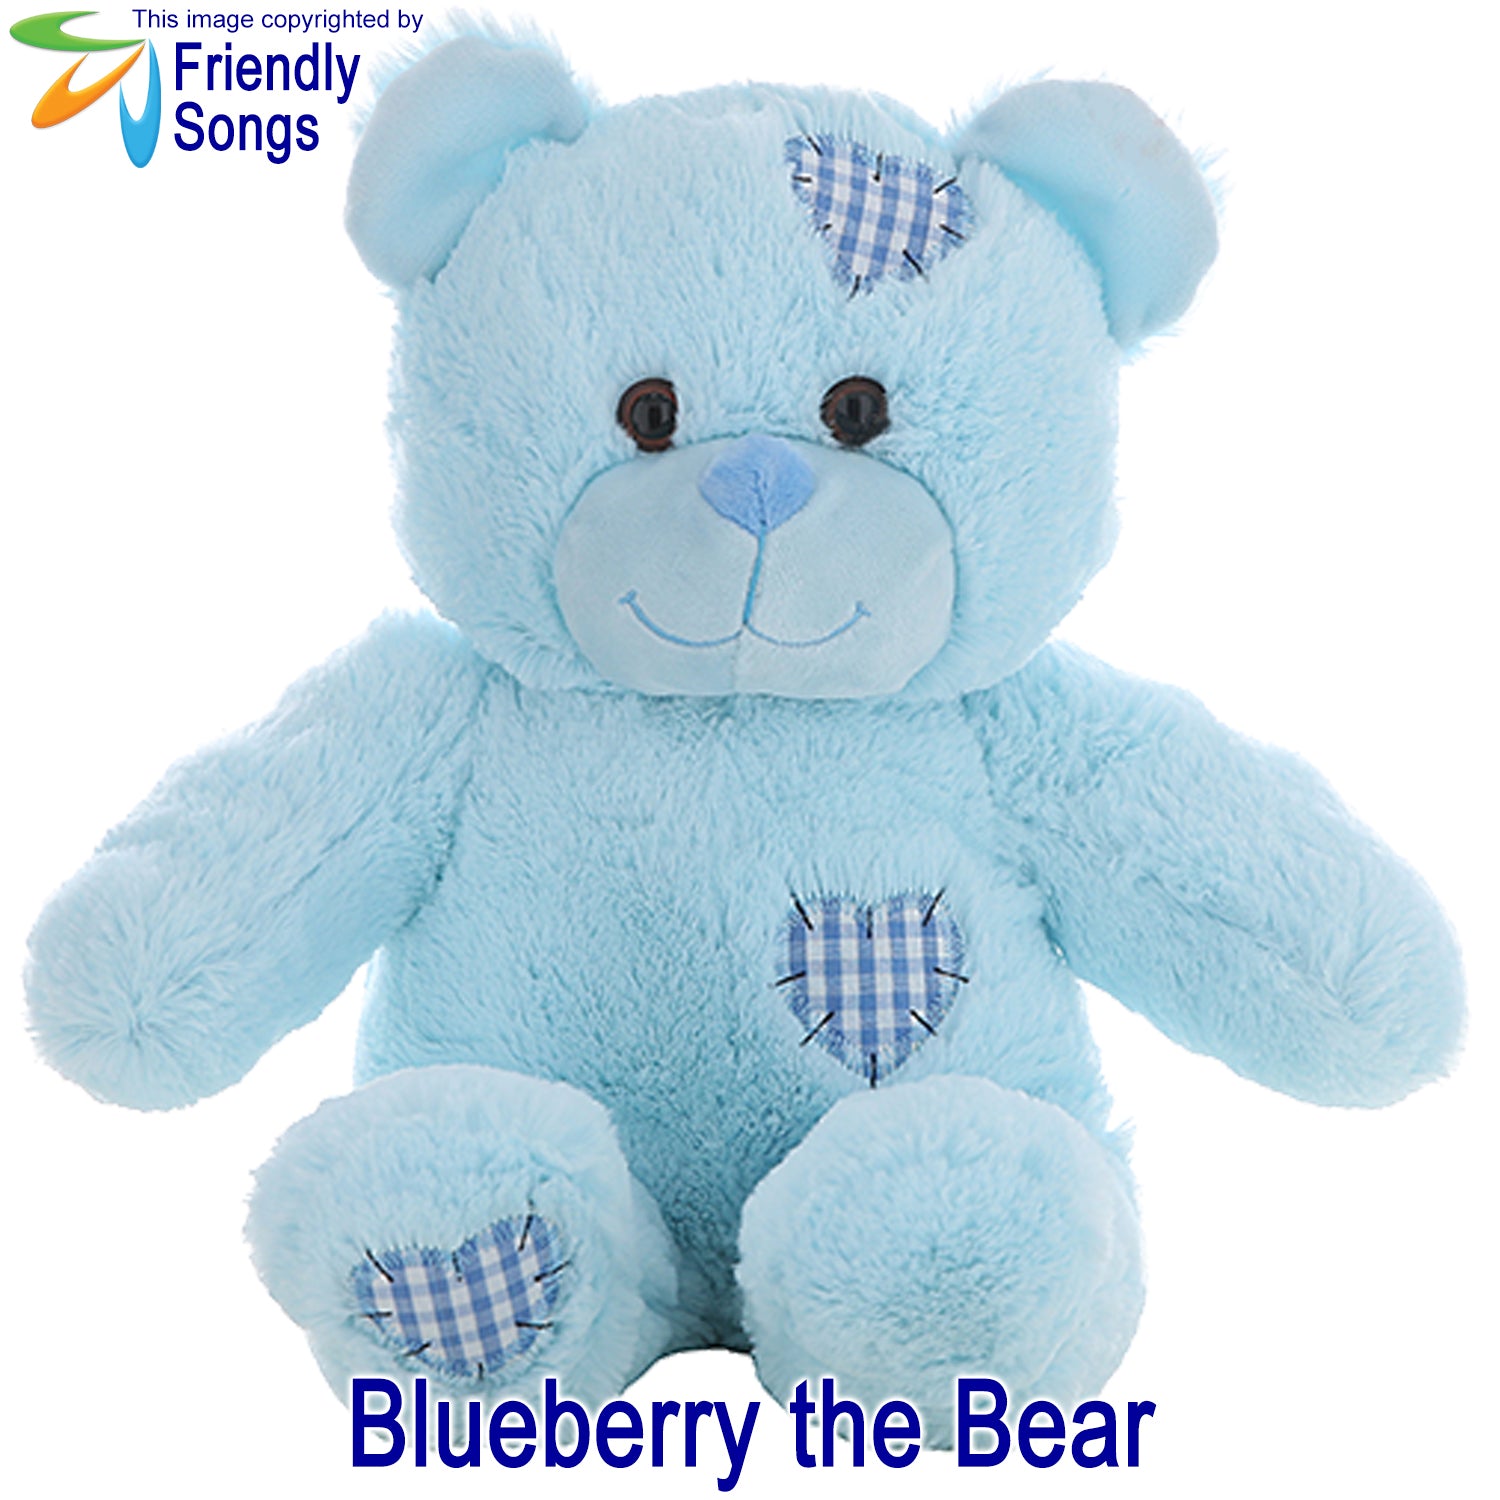 Blueberry the bear soft toy